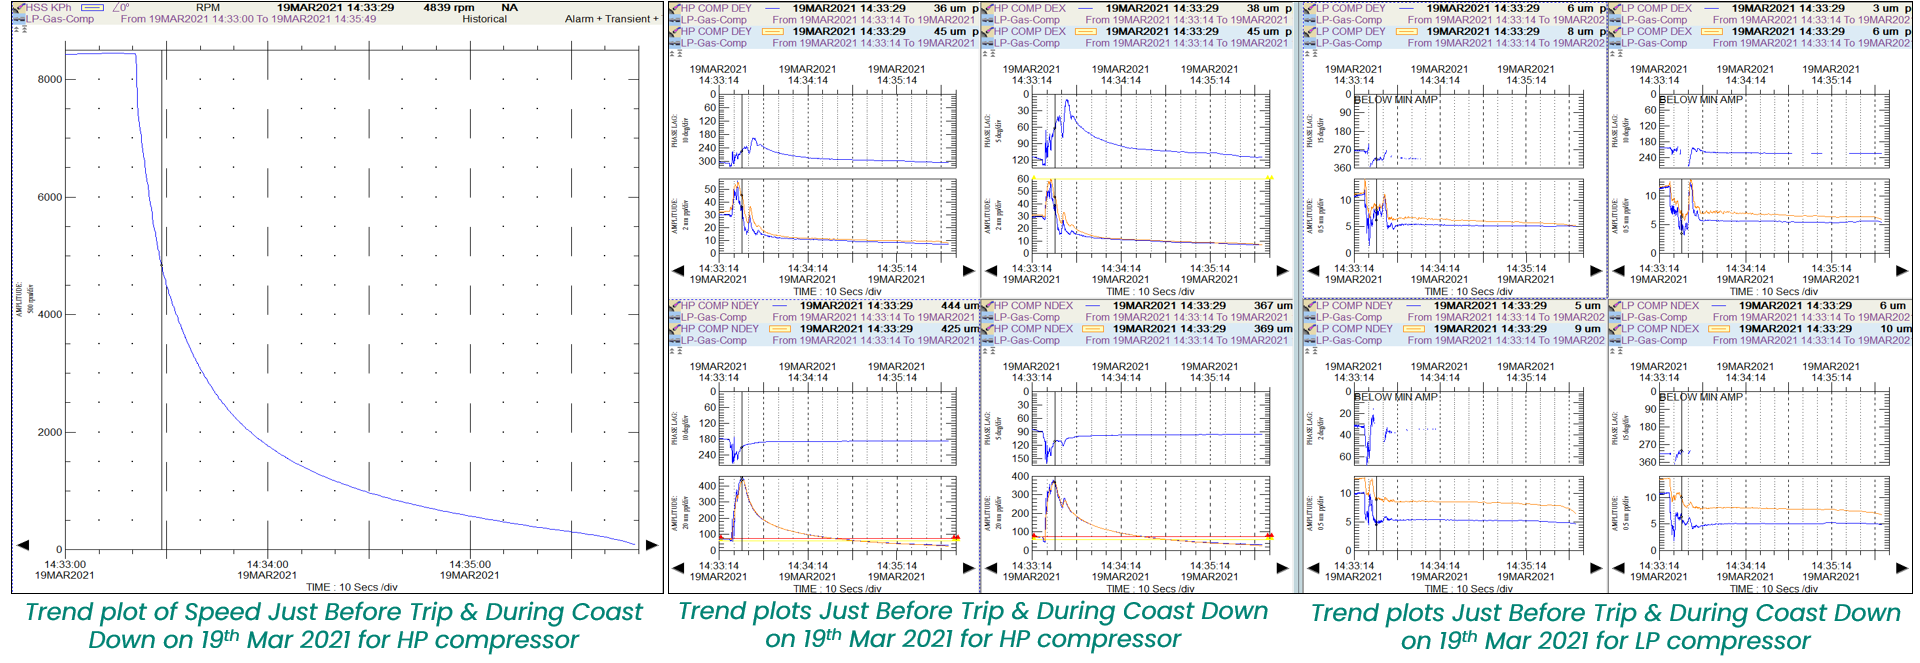 The trend plots of HP case compressor showed very high overall vibration amplitudes during coast down after trip mainly at 1X frequency component whereas no prominent change was observed on LP case compressor. 